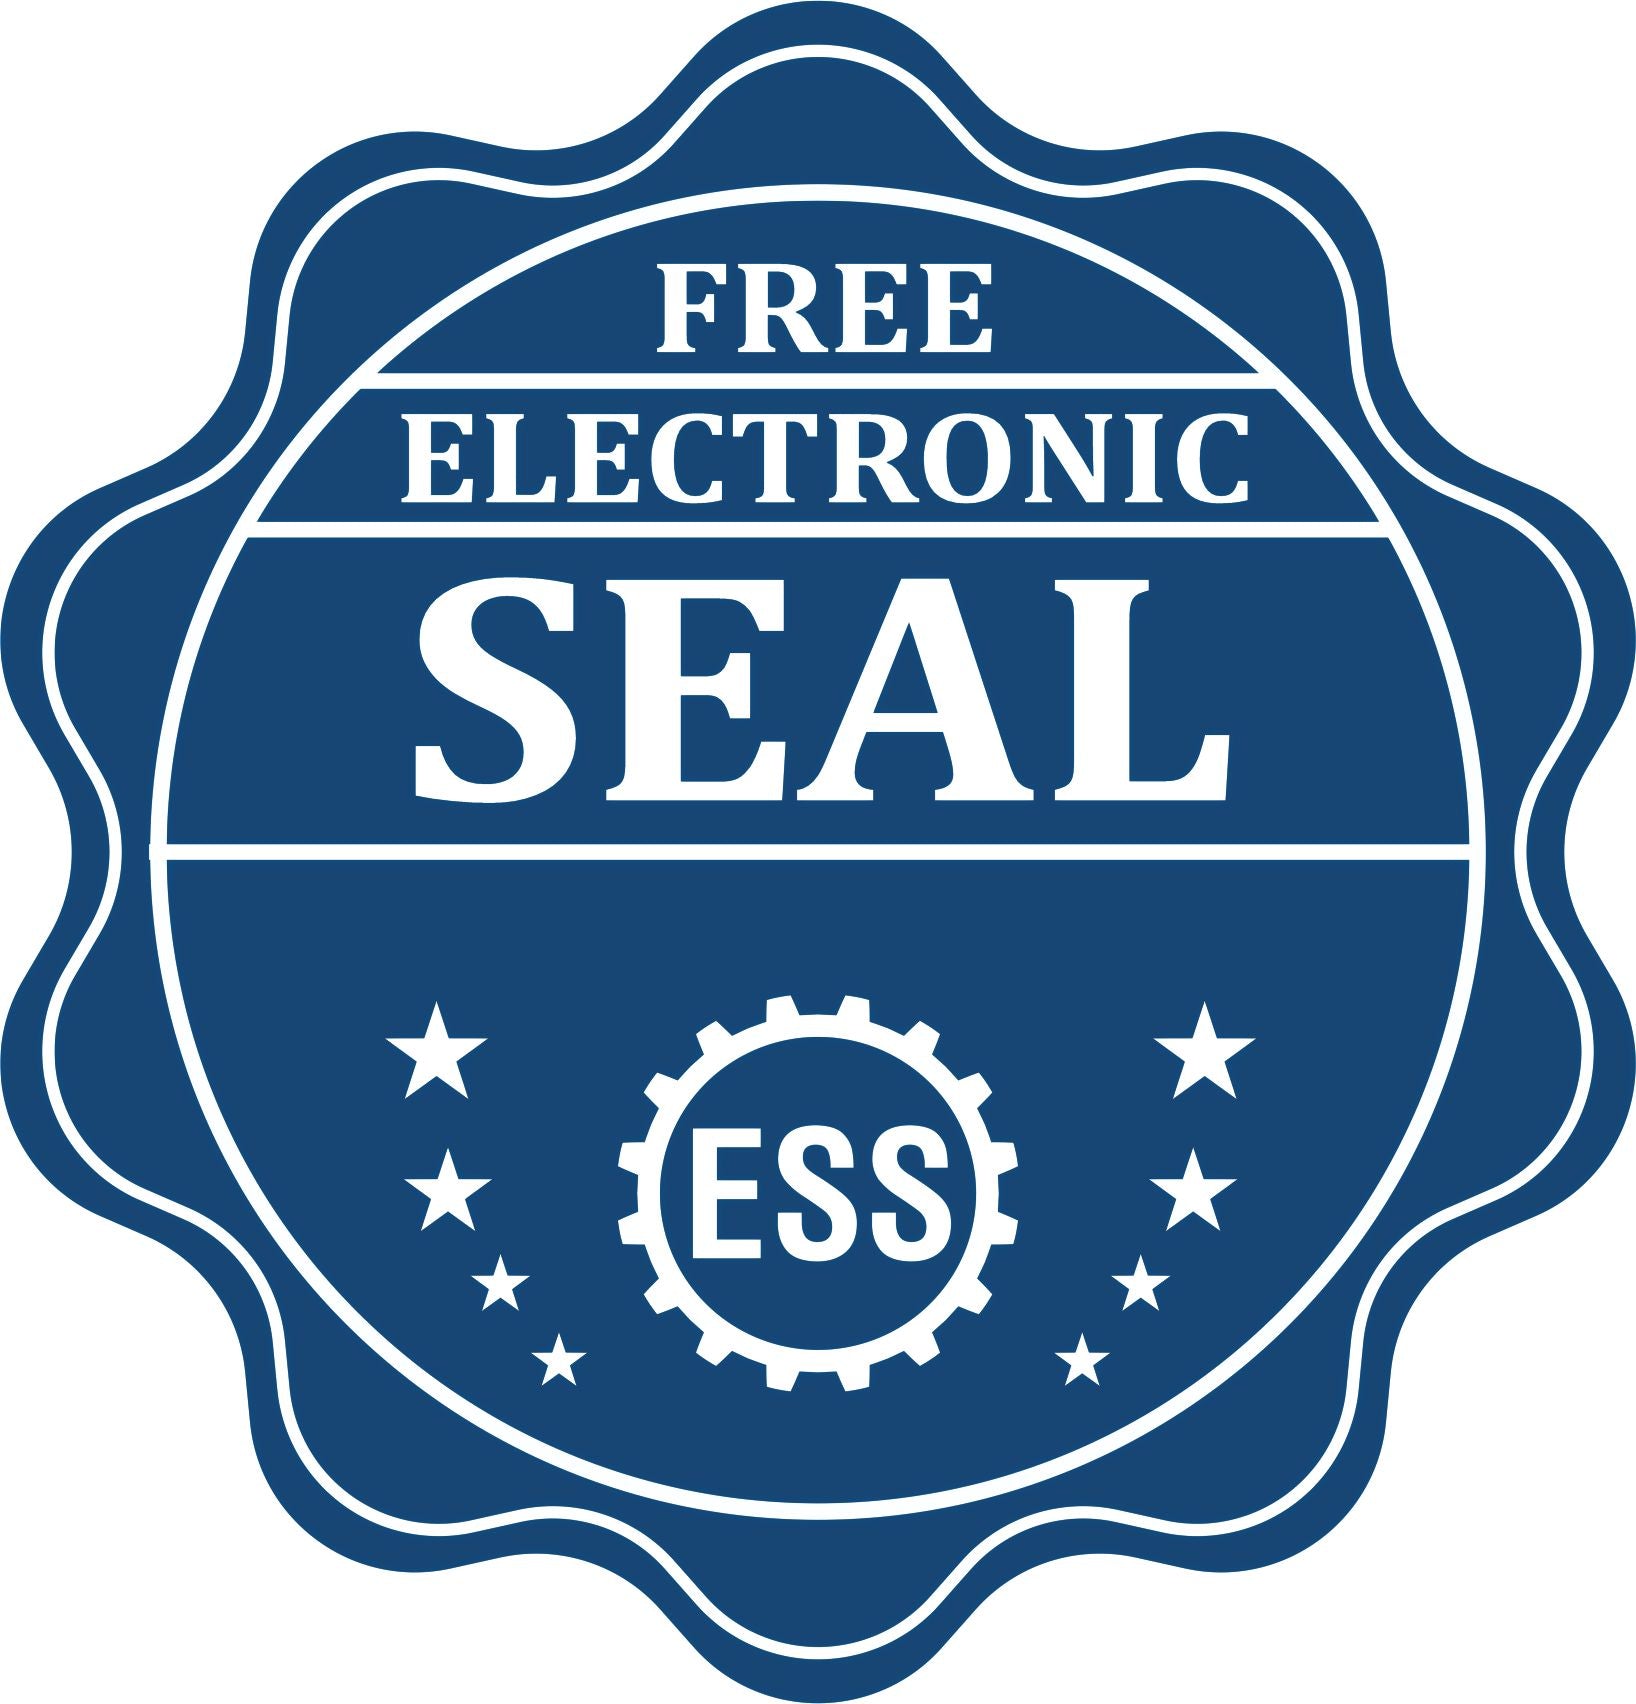 A badge showing a free electronic seal for the Premium MaxLight Pre-Inked Alabama Engineering Stamp with stars and the ESS gear on the emblem.